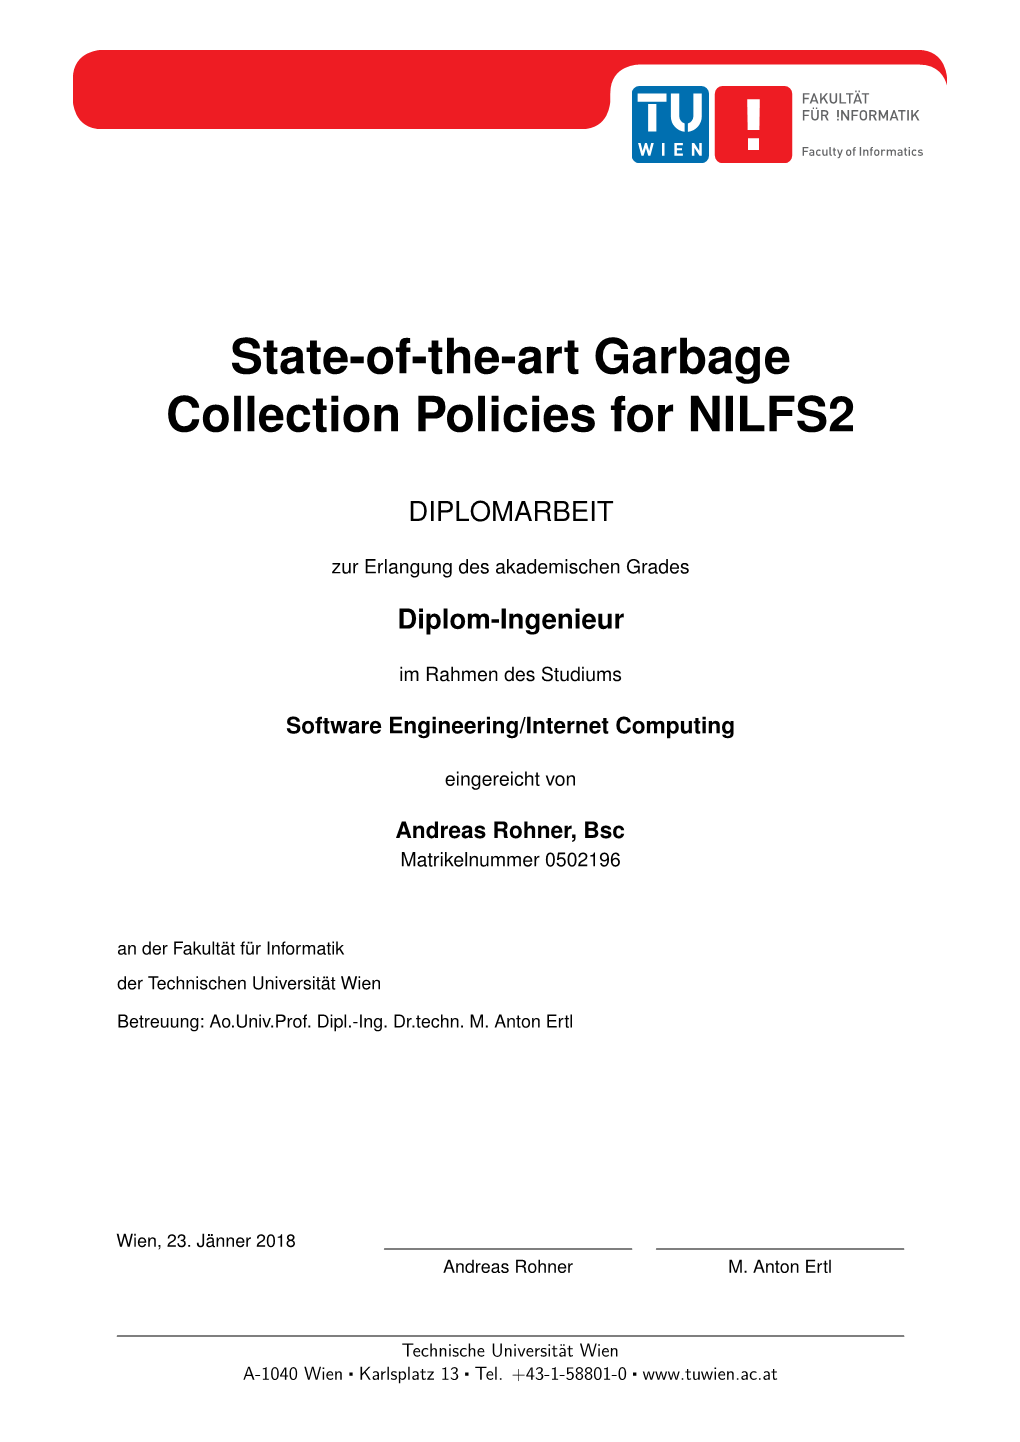 State-Of-The-Art Garbage Collection Policies for NILFS2